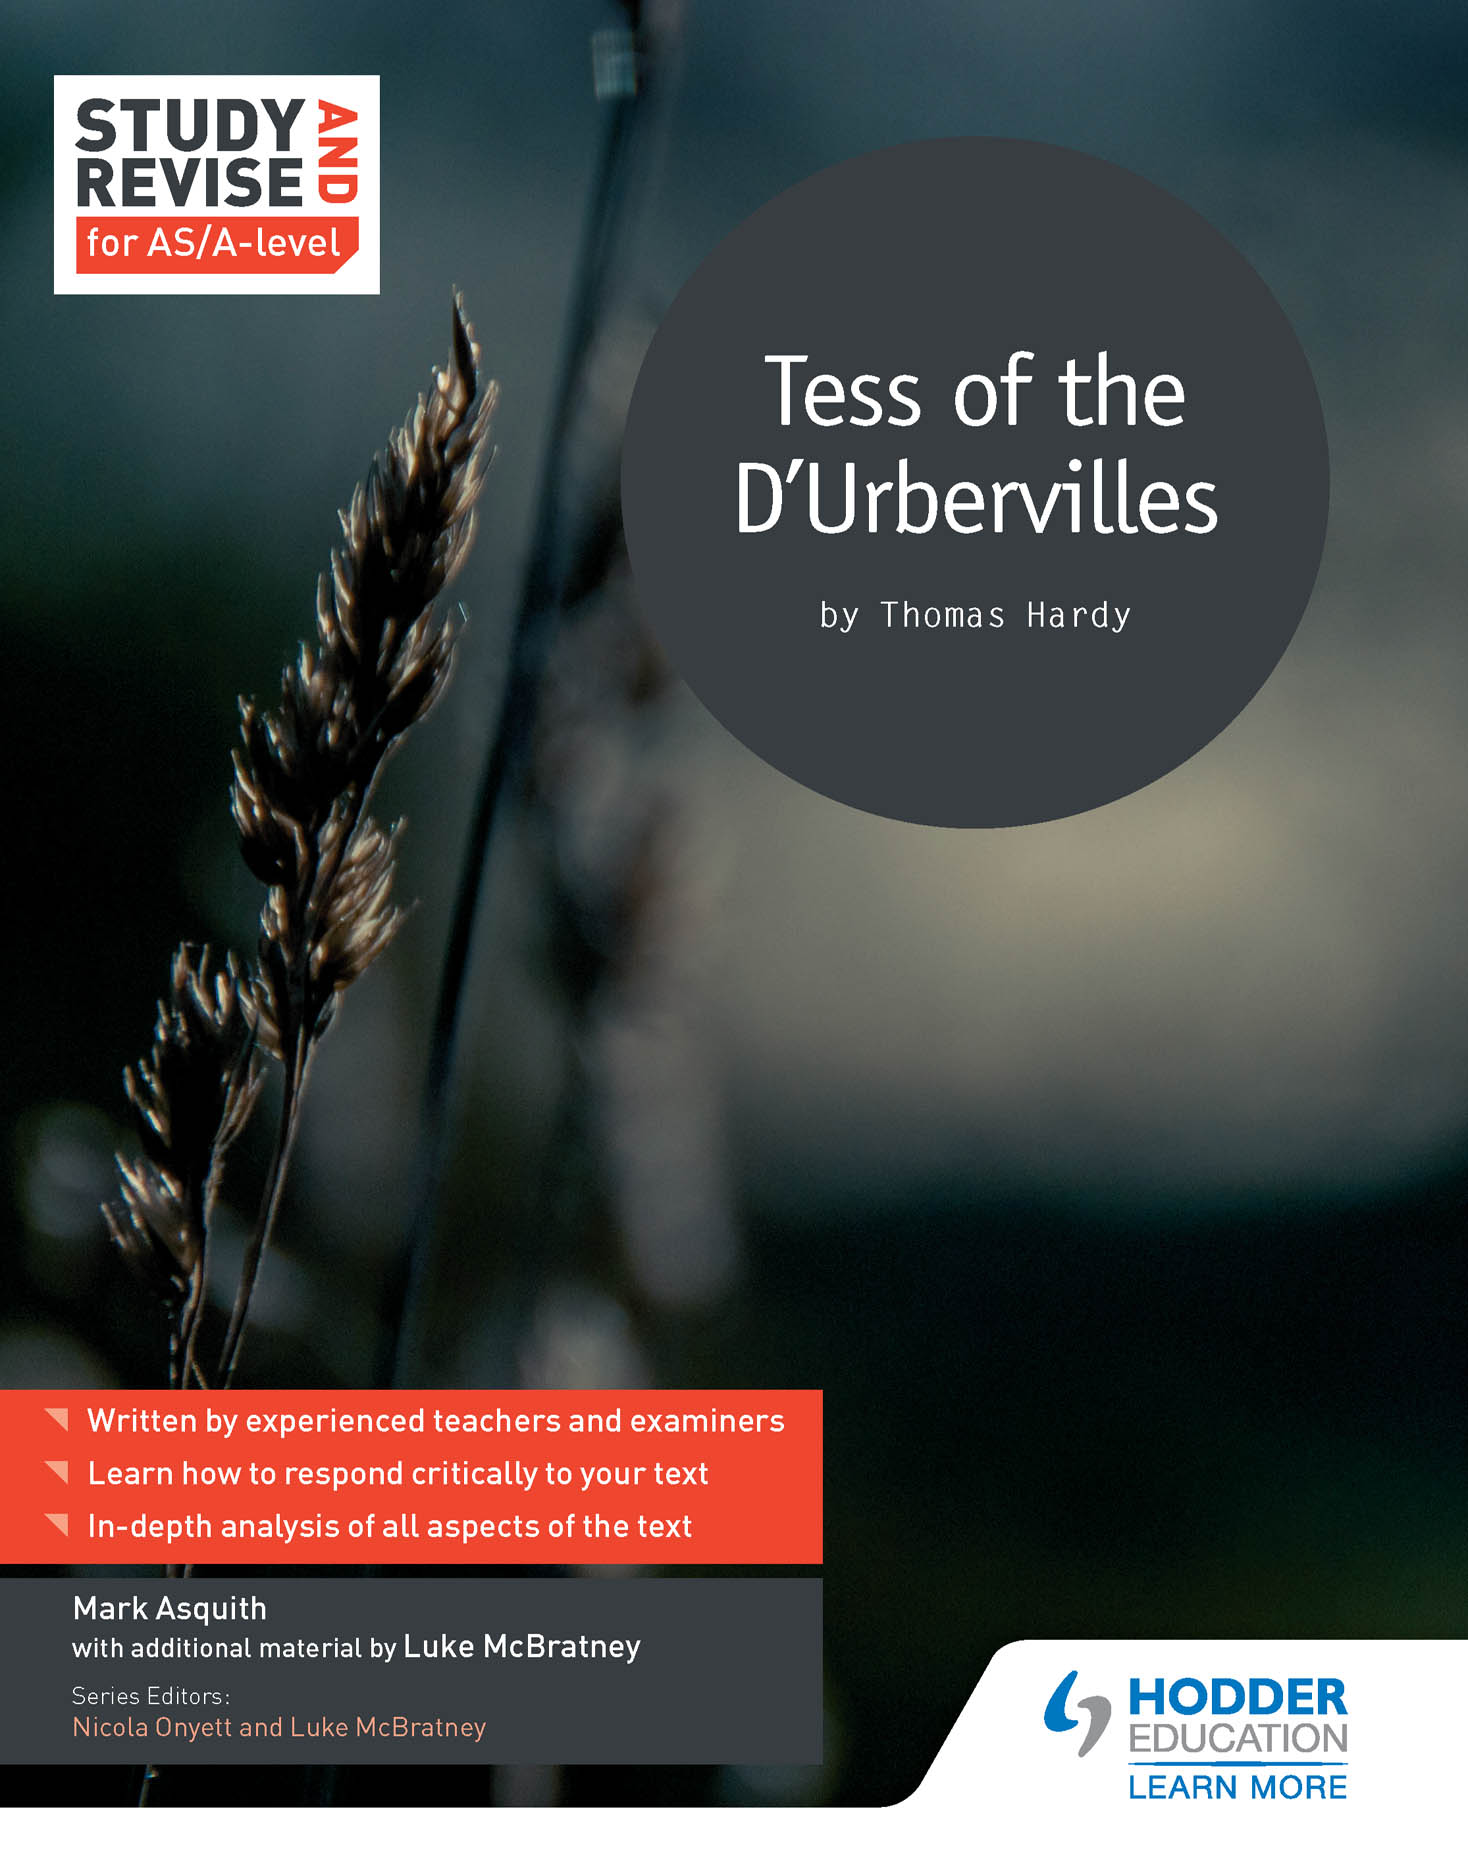 [DESCATALOGADO] Study and Revise for AS/A-level: Tess of the D'Urbervilles